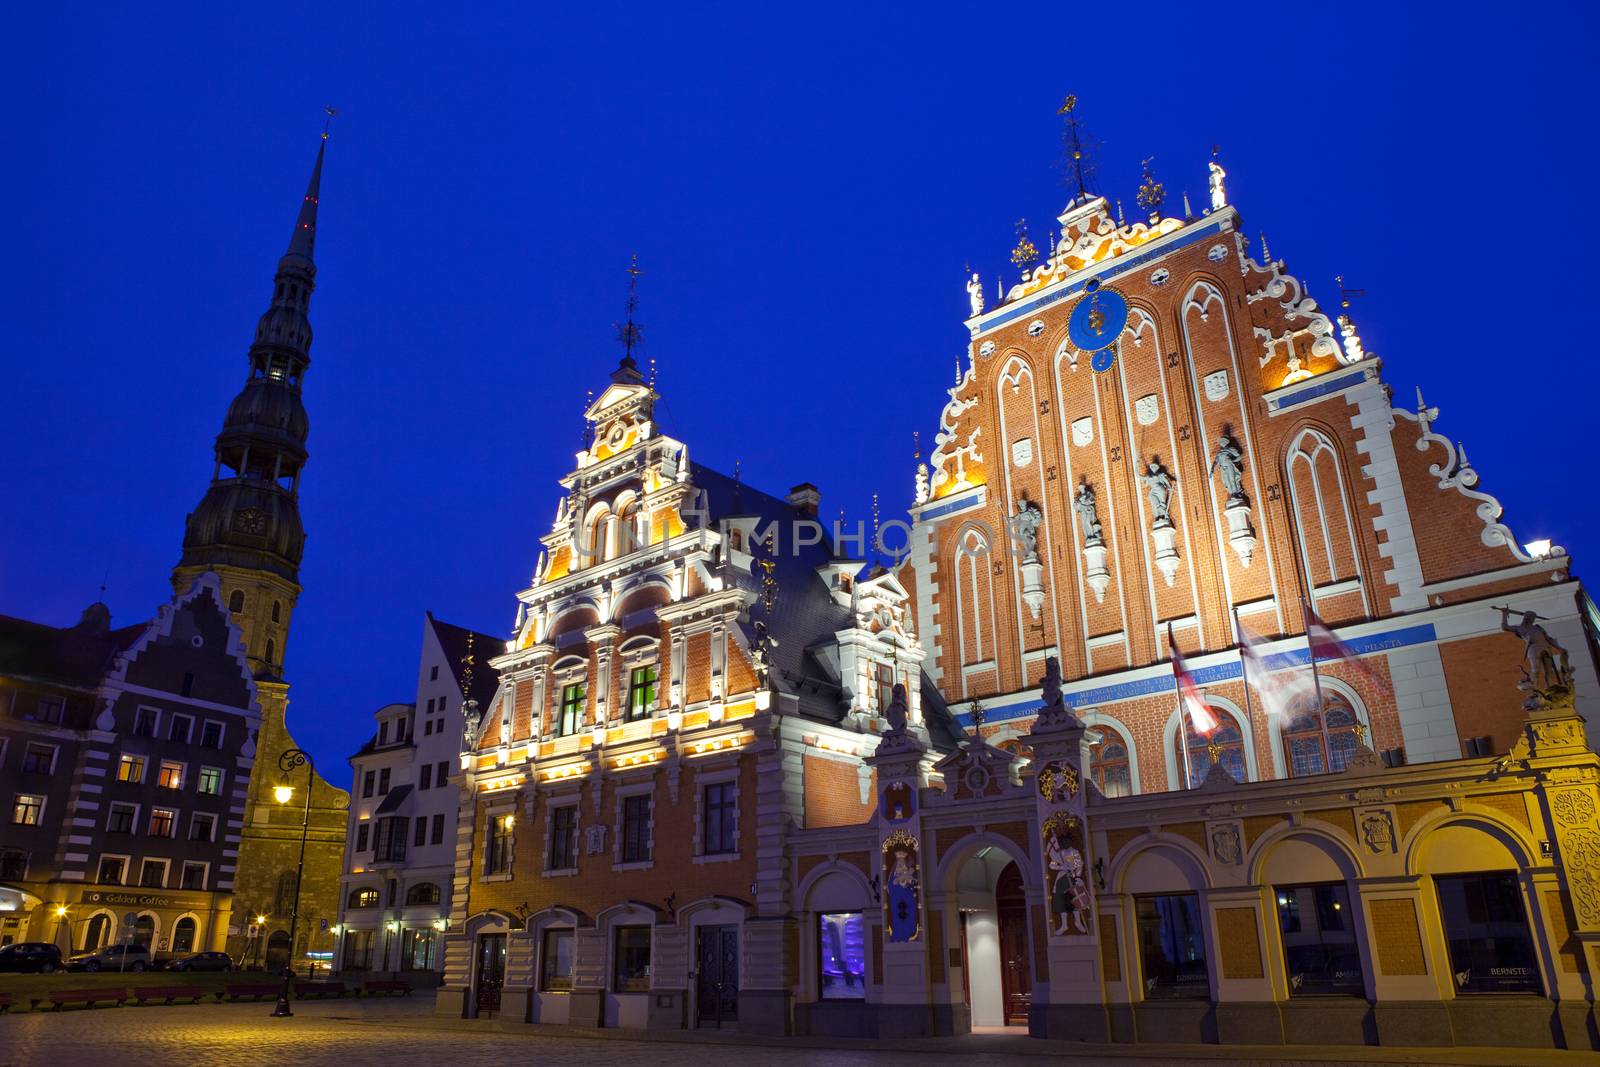 The beautiful House of the Blackheads and St. Peter's Curch in Riga, Latvia.